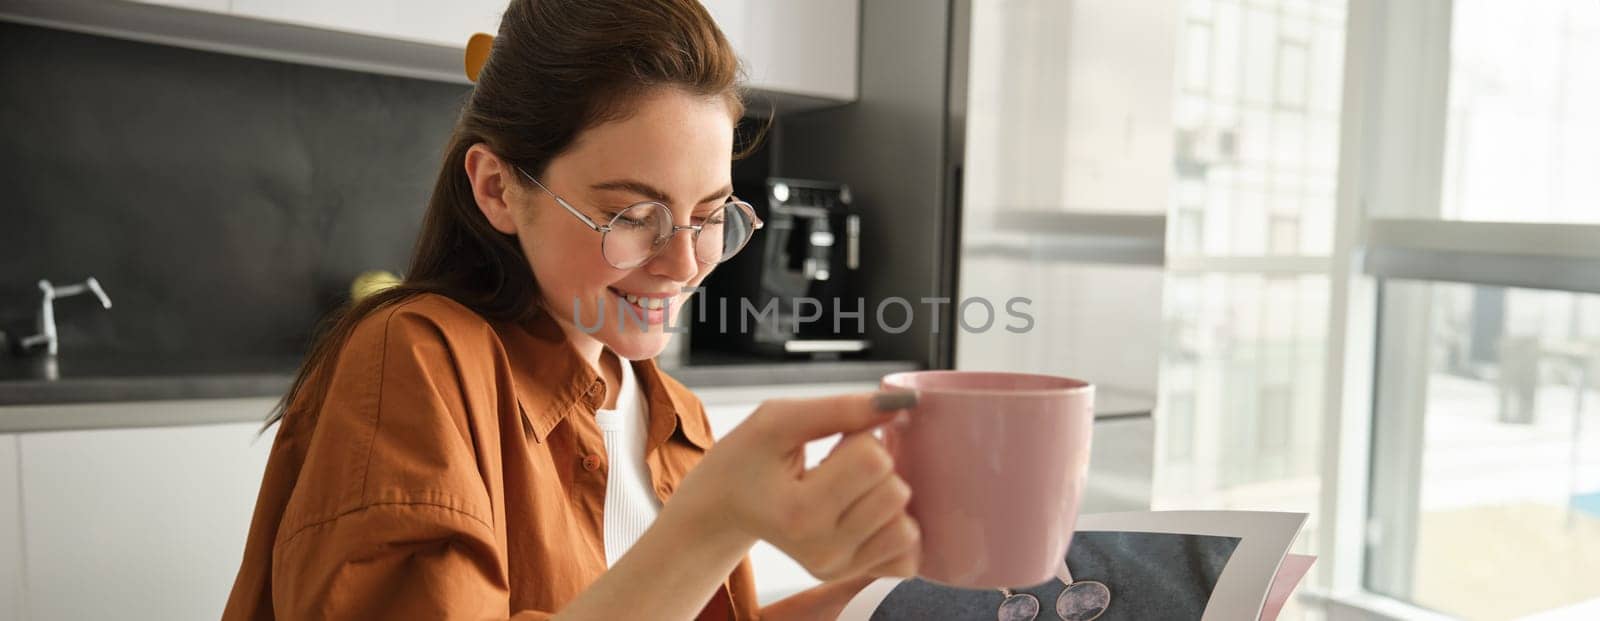 Portrait of young beautiful woman, relaxing with cup of fresh aroma coffee, holding mug and sitting in kitchen, smiling from happiness.